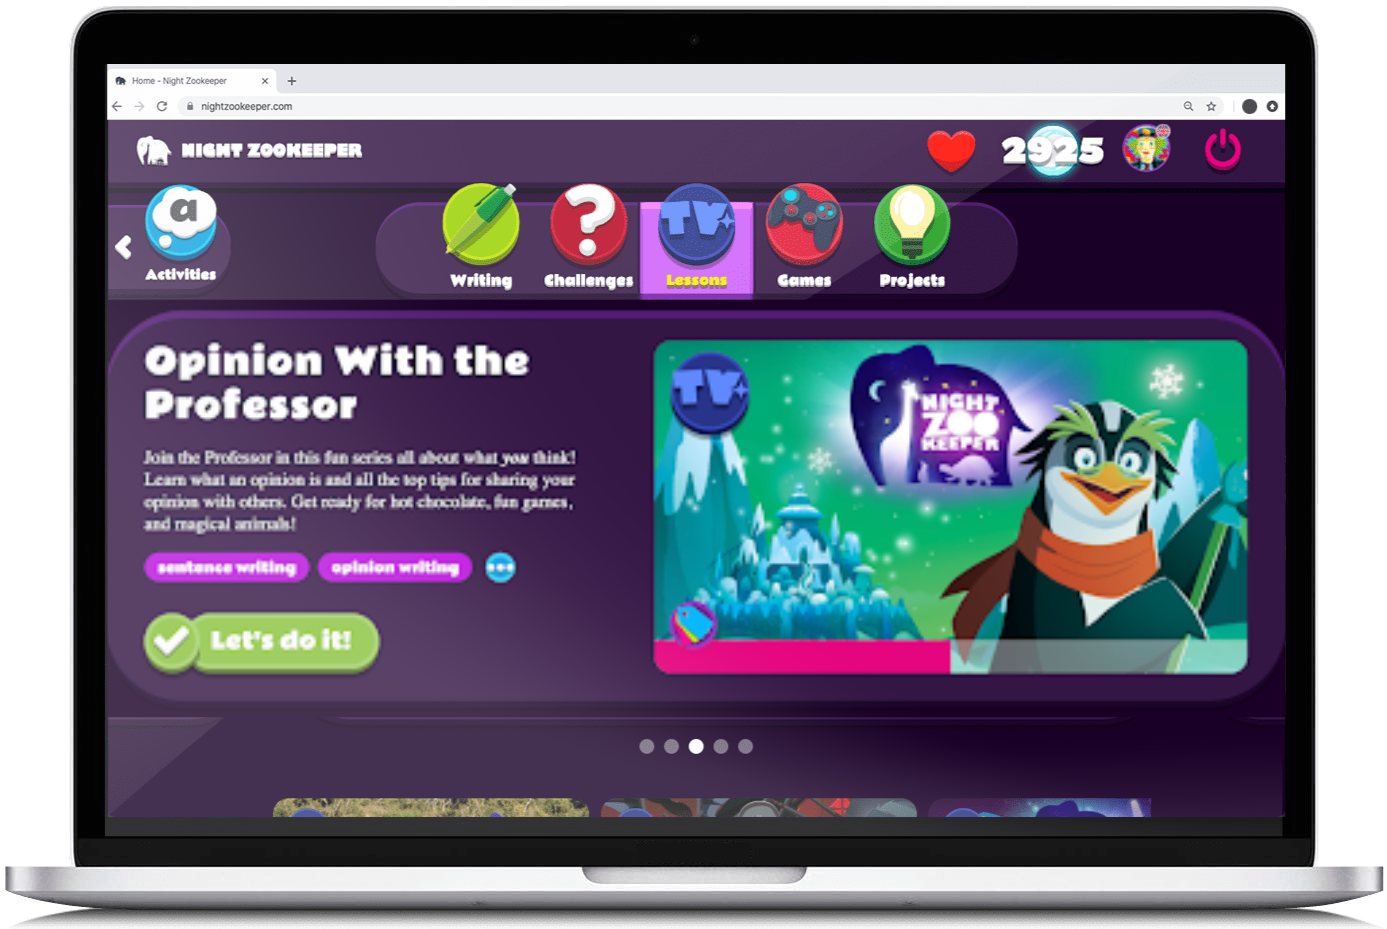 Opinion writing lesson series on Nightzookeeper.com.